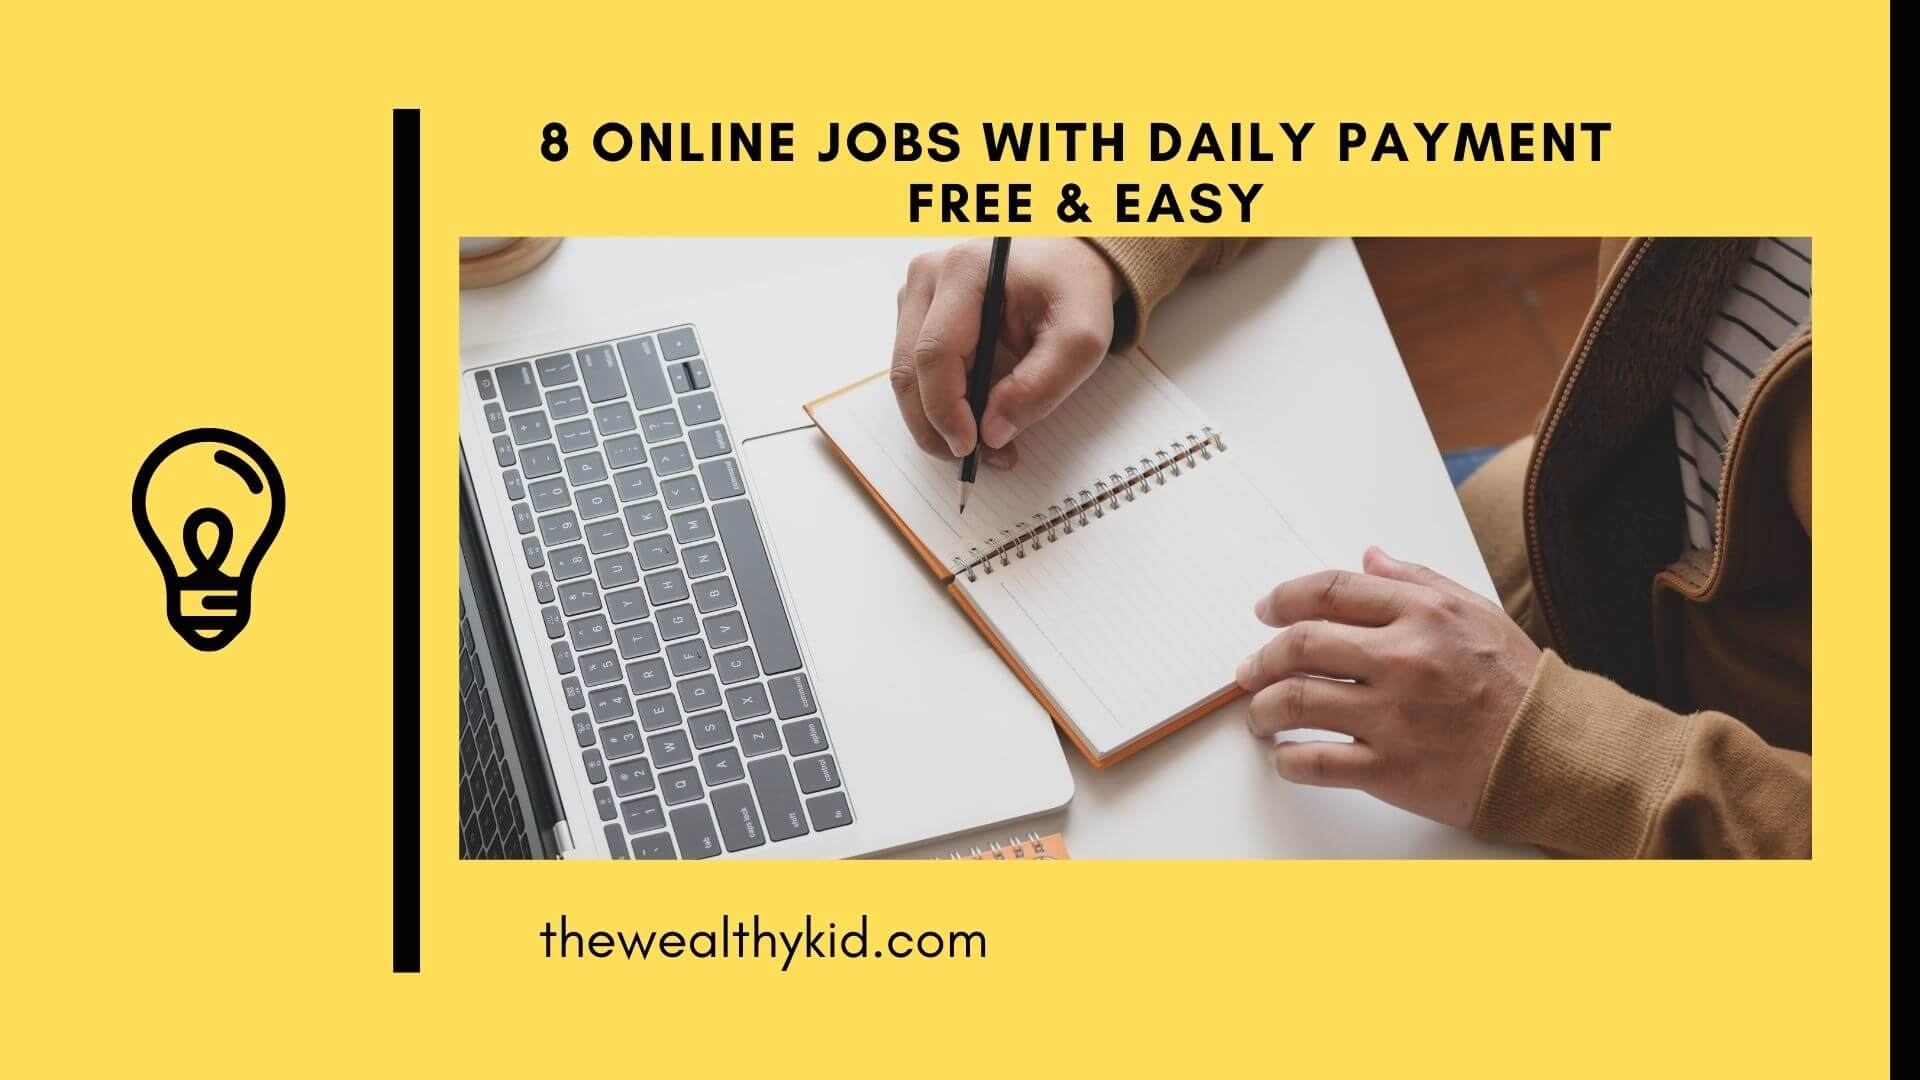 8 Online Jobs With Daily Payment – Don’t miss out!